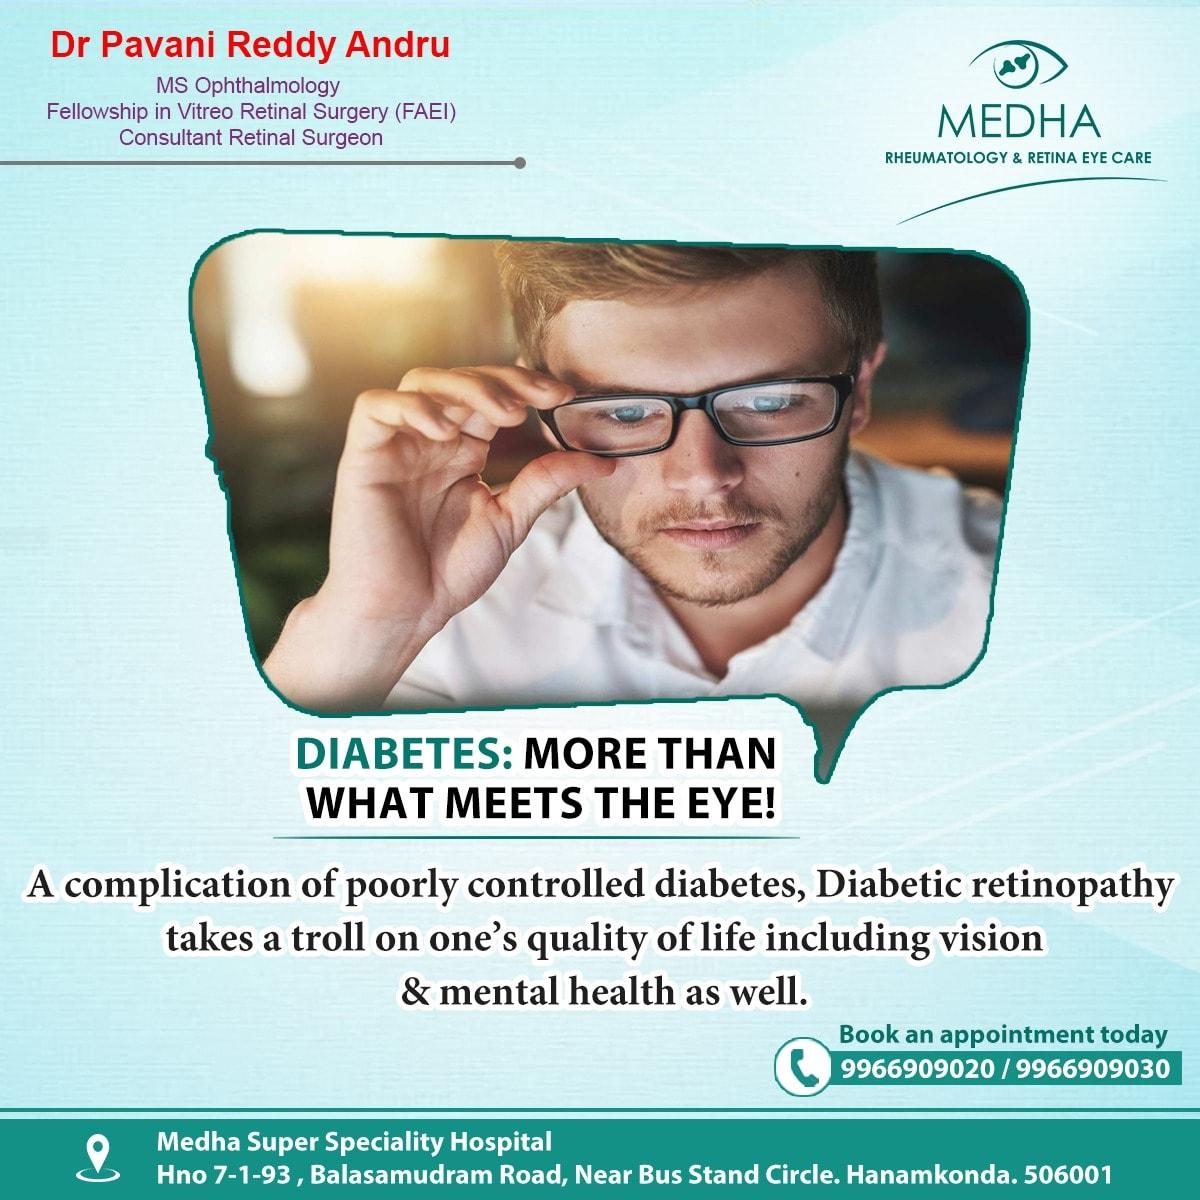 Diabetic retinopathy is a diabetes complication that affects eyes